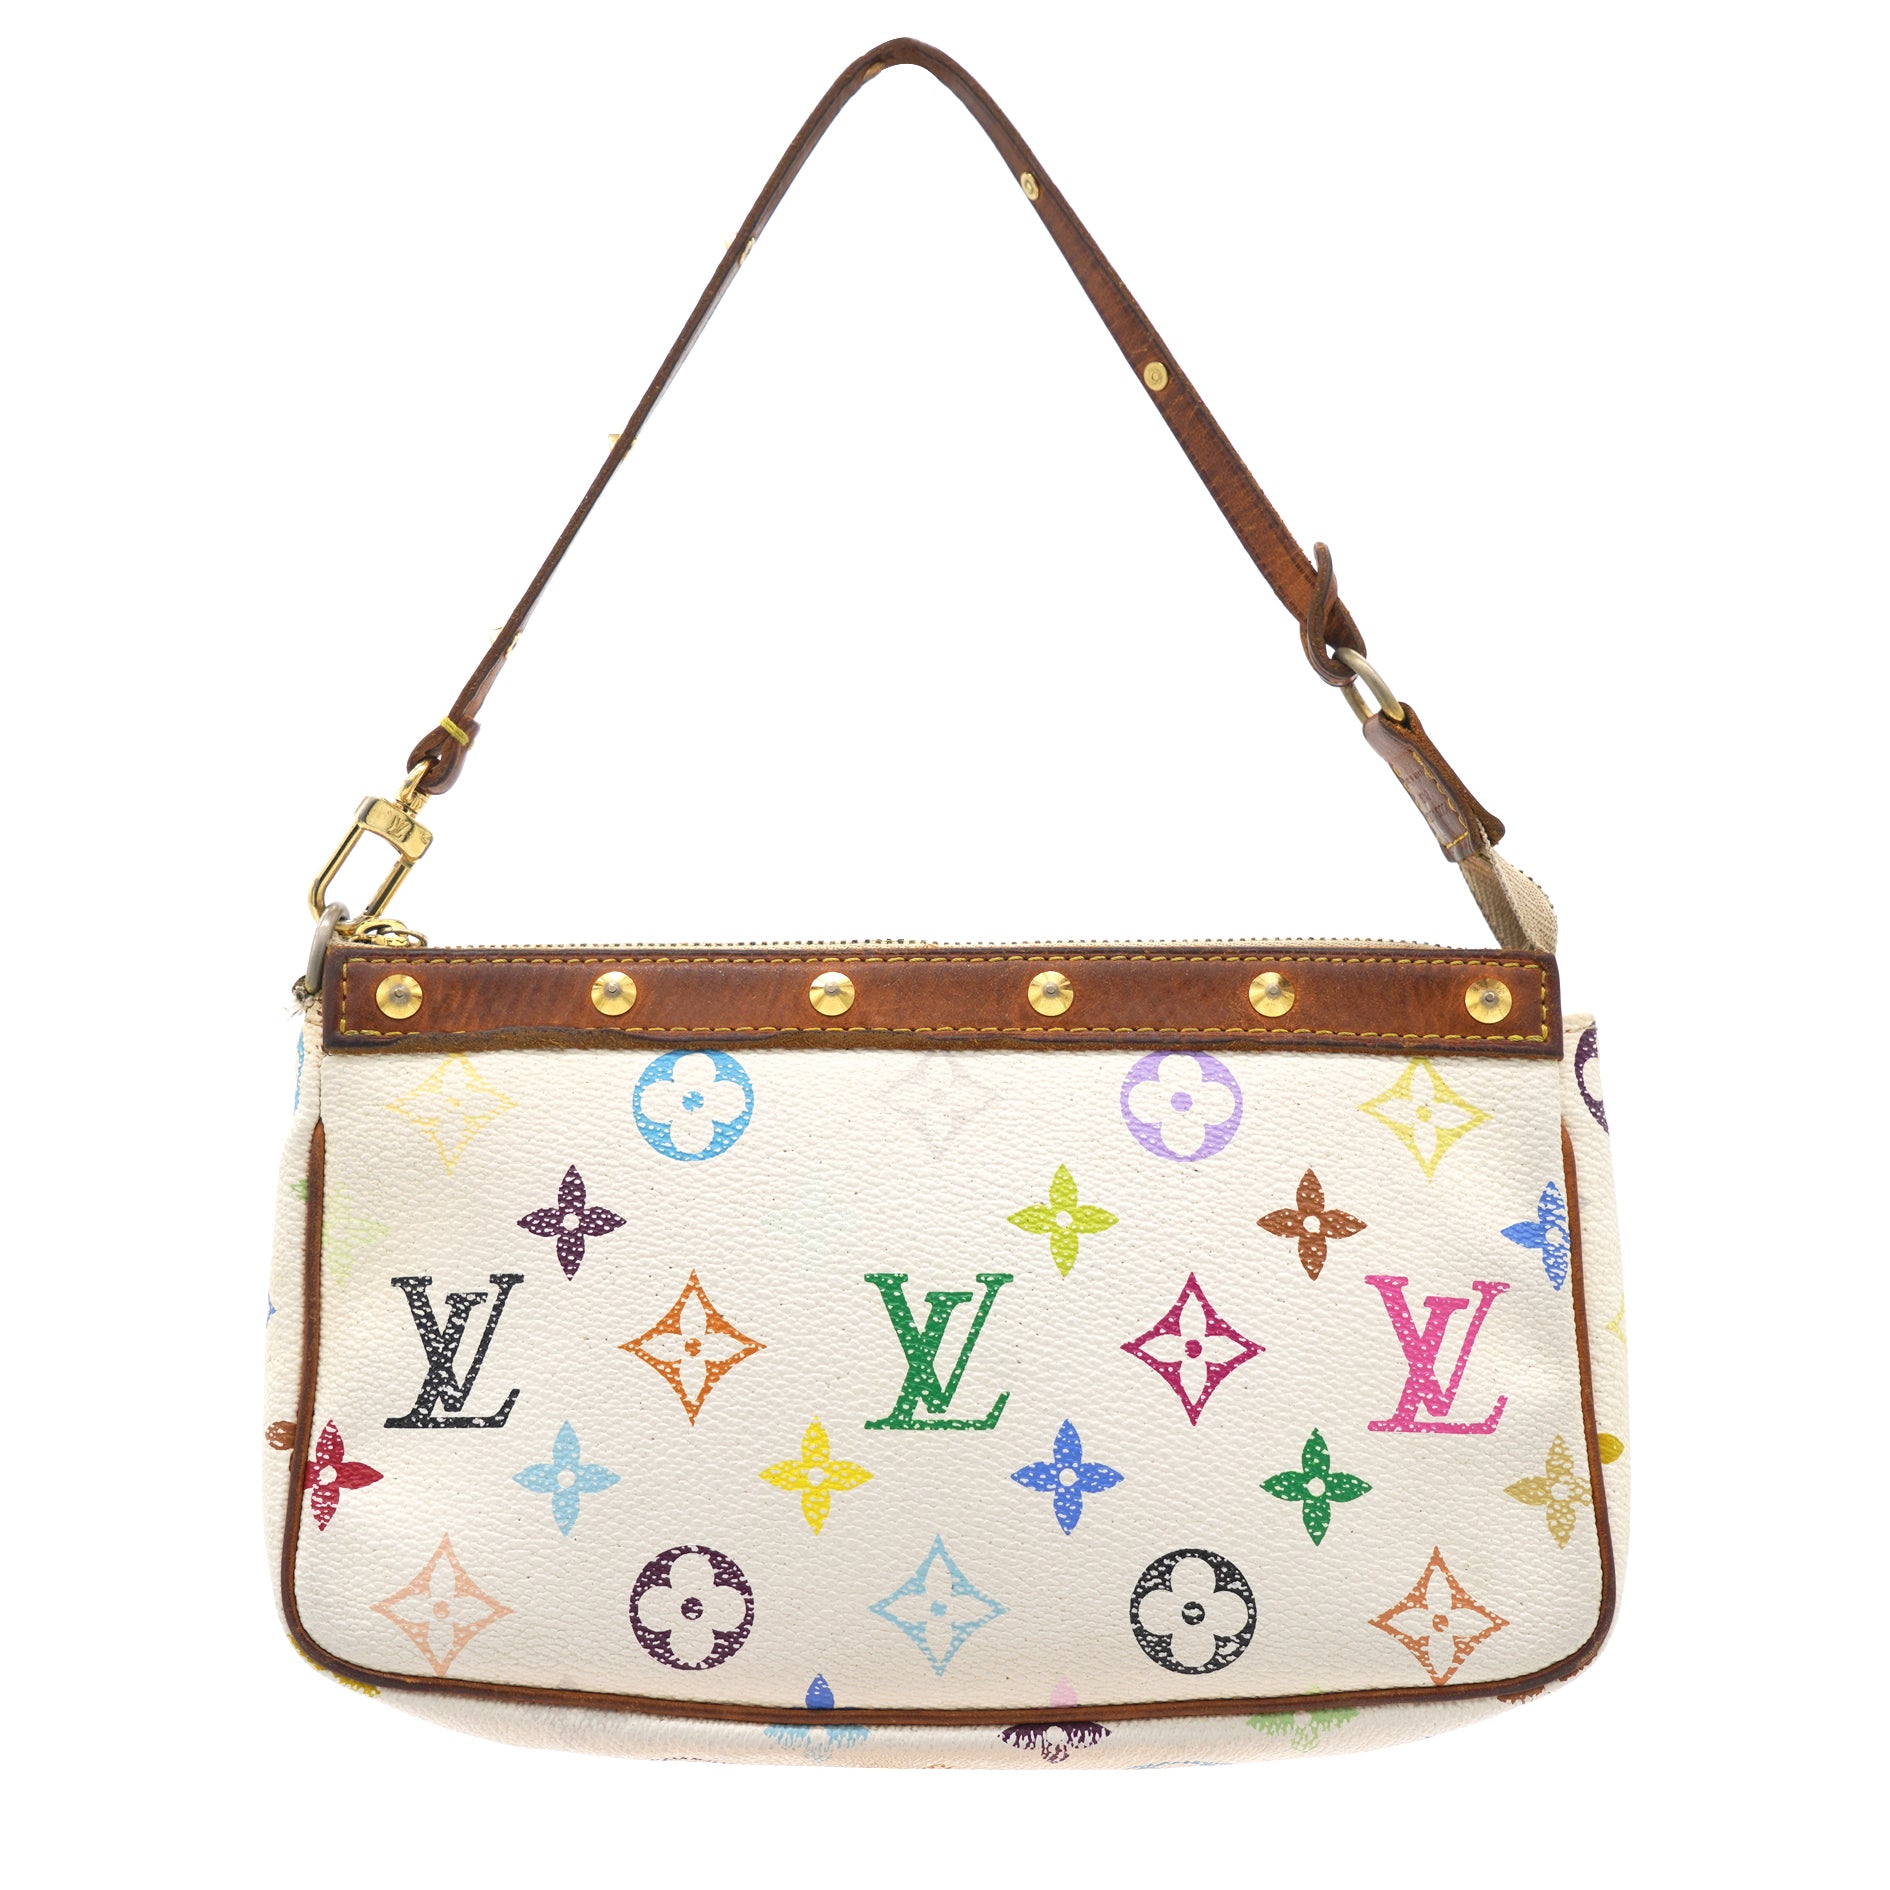 Louis Vuitton White Small Bag Hotsell - www.edoc.com.vn 1694801154